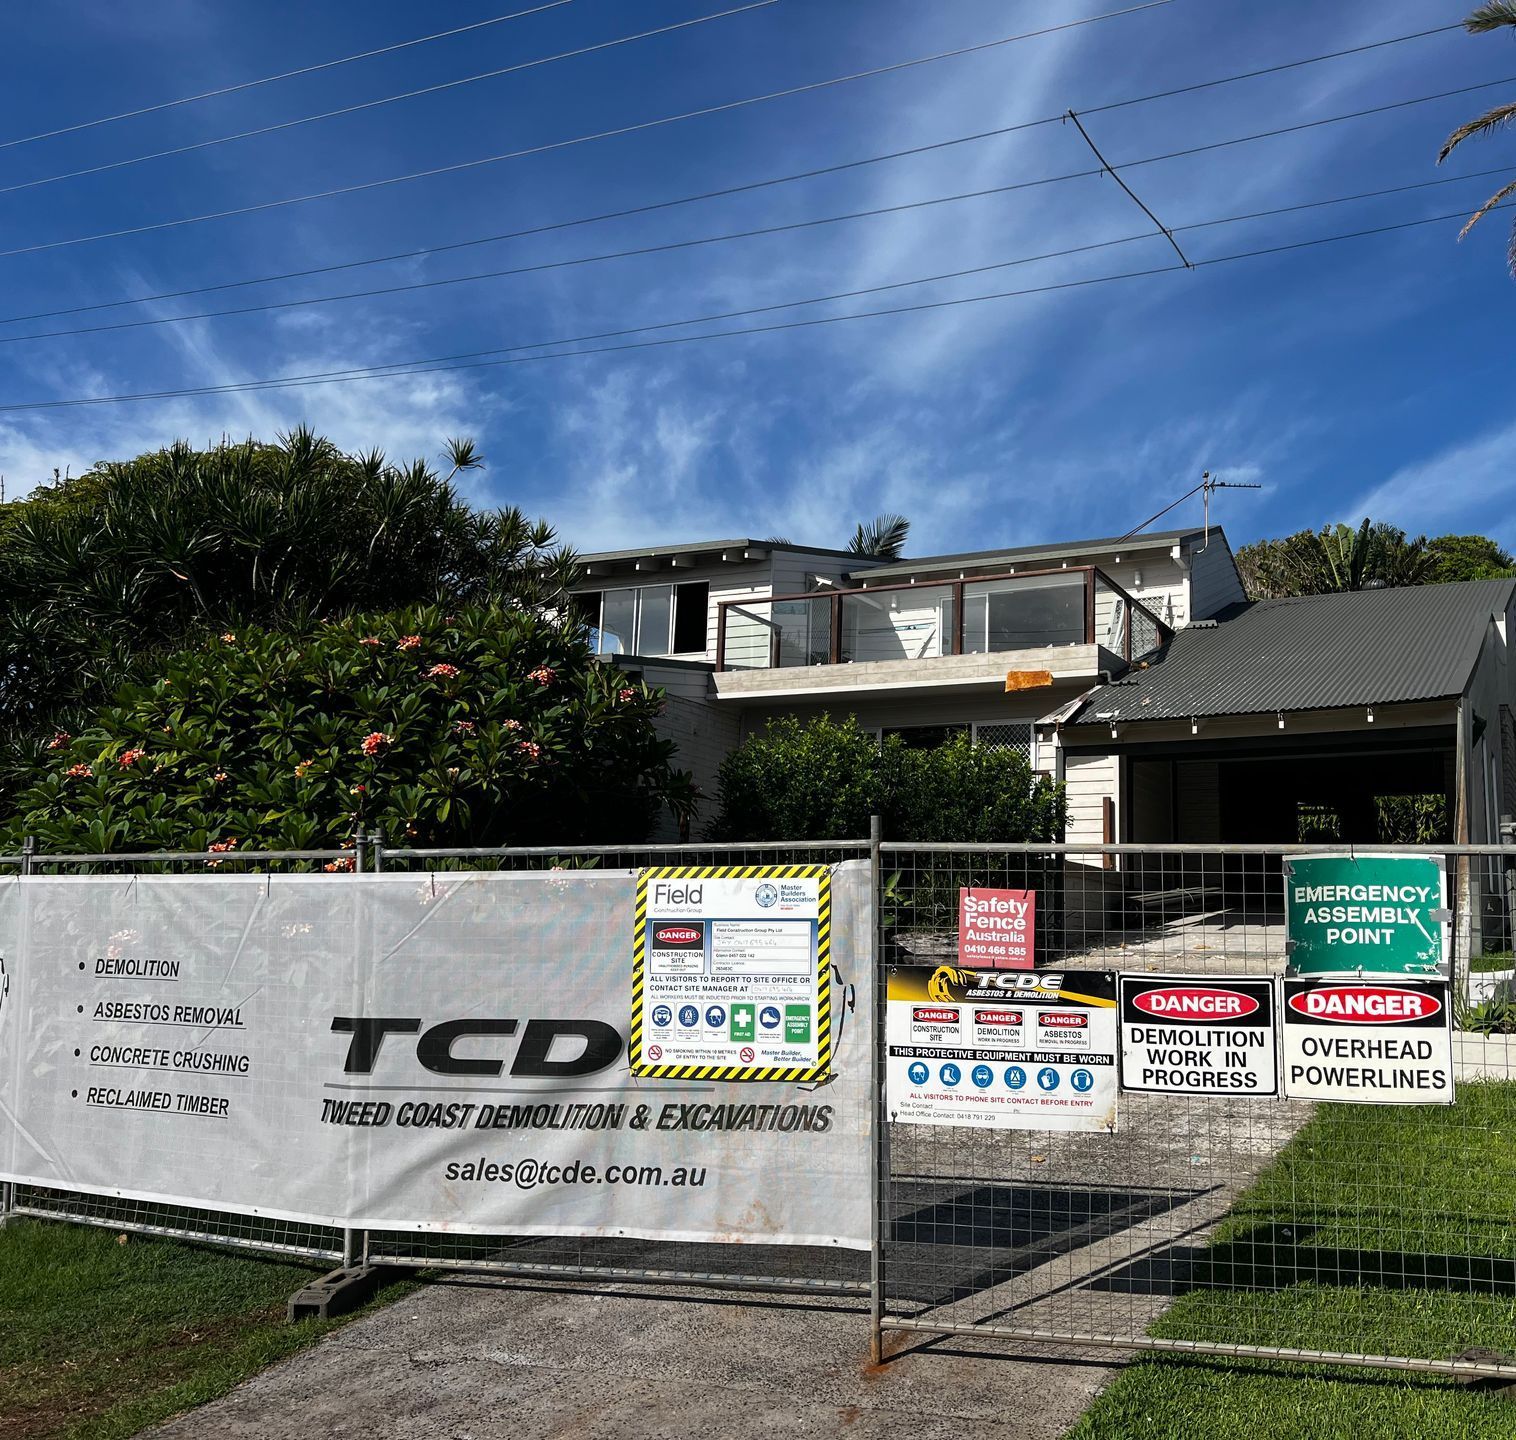 All Workers — Asbestos Removal And Demolition in Northern Rivers, NSW